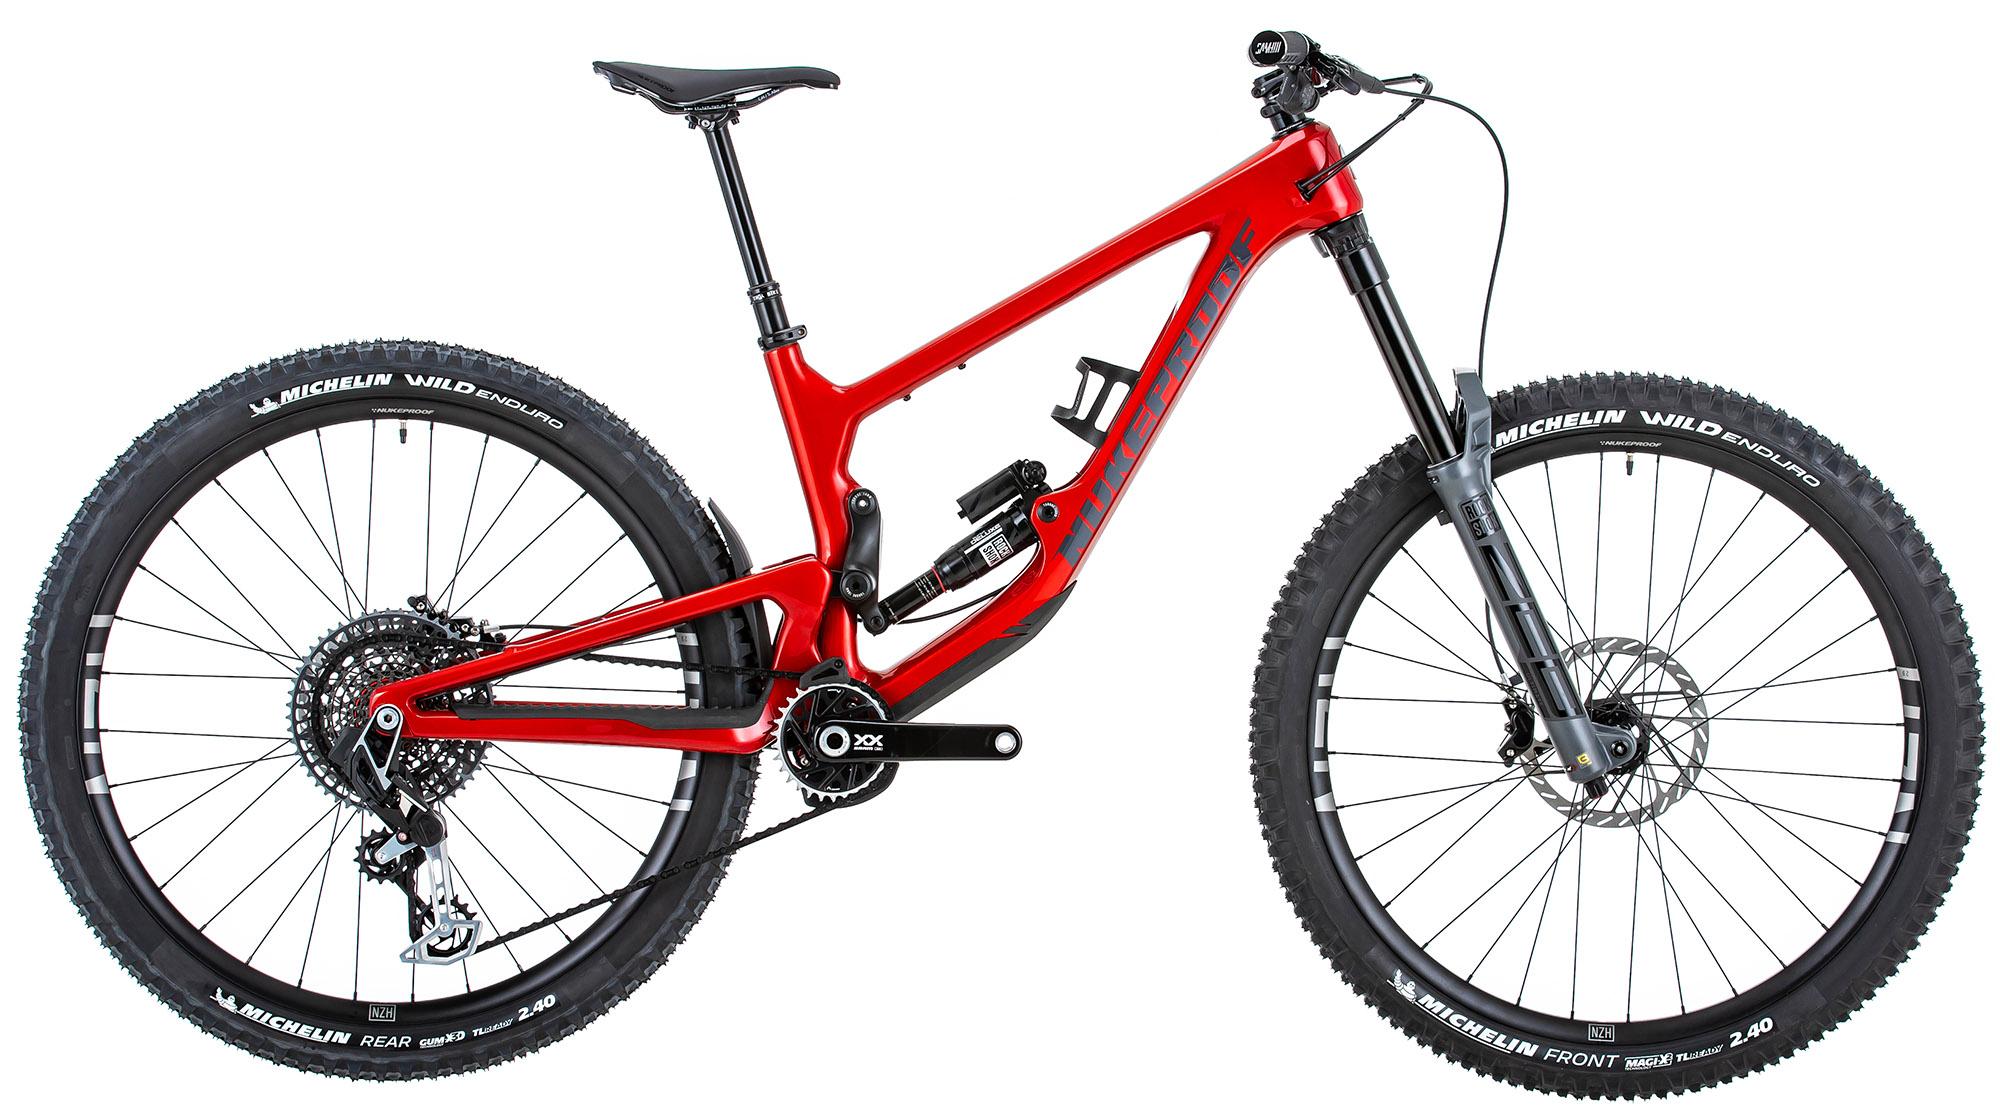 Nukeproof Giga 290 Rs Carbon Bike (xx Eagle Trans)  Racing Red